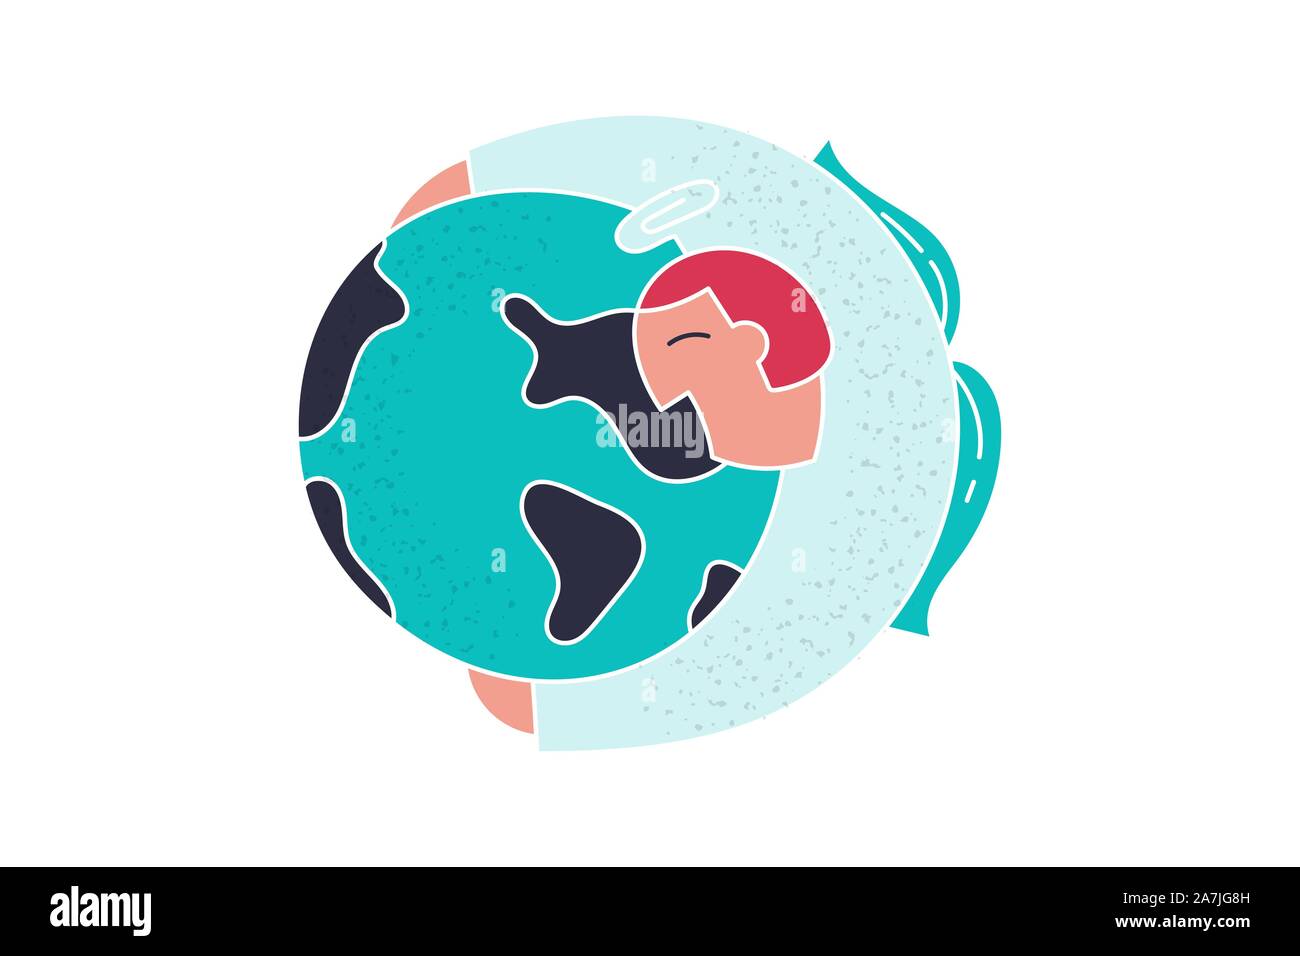 Angel God hugs the world, planet care about peace Stock Vector